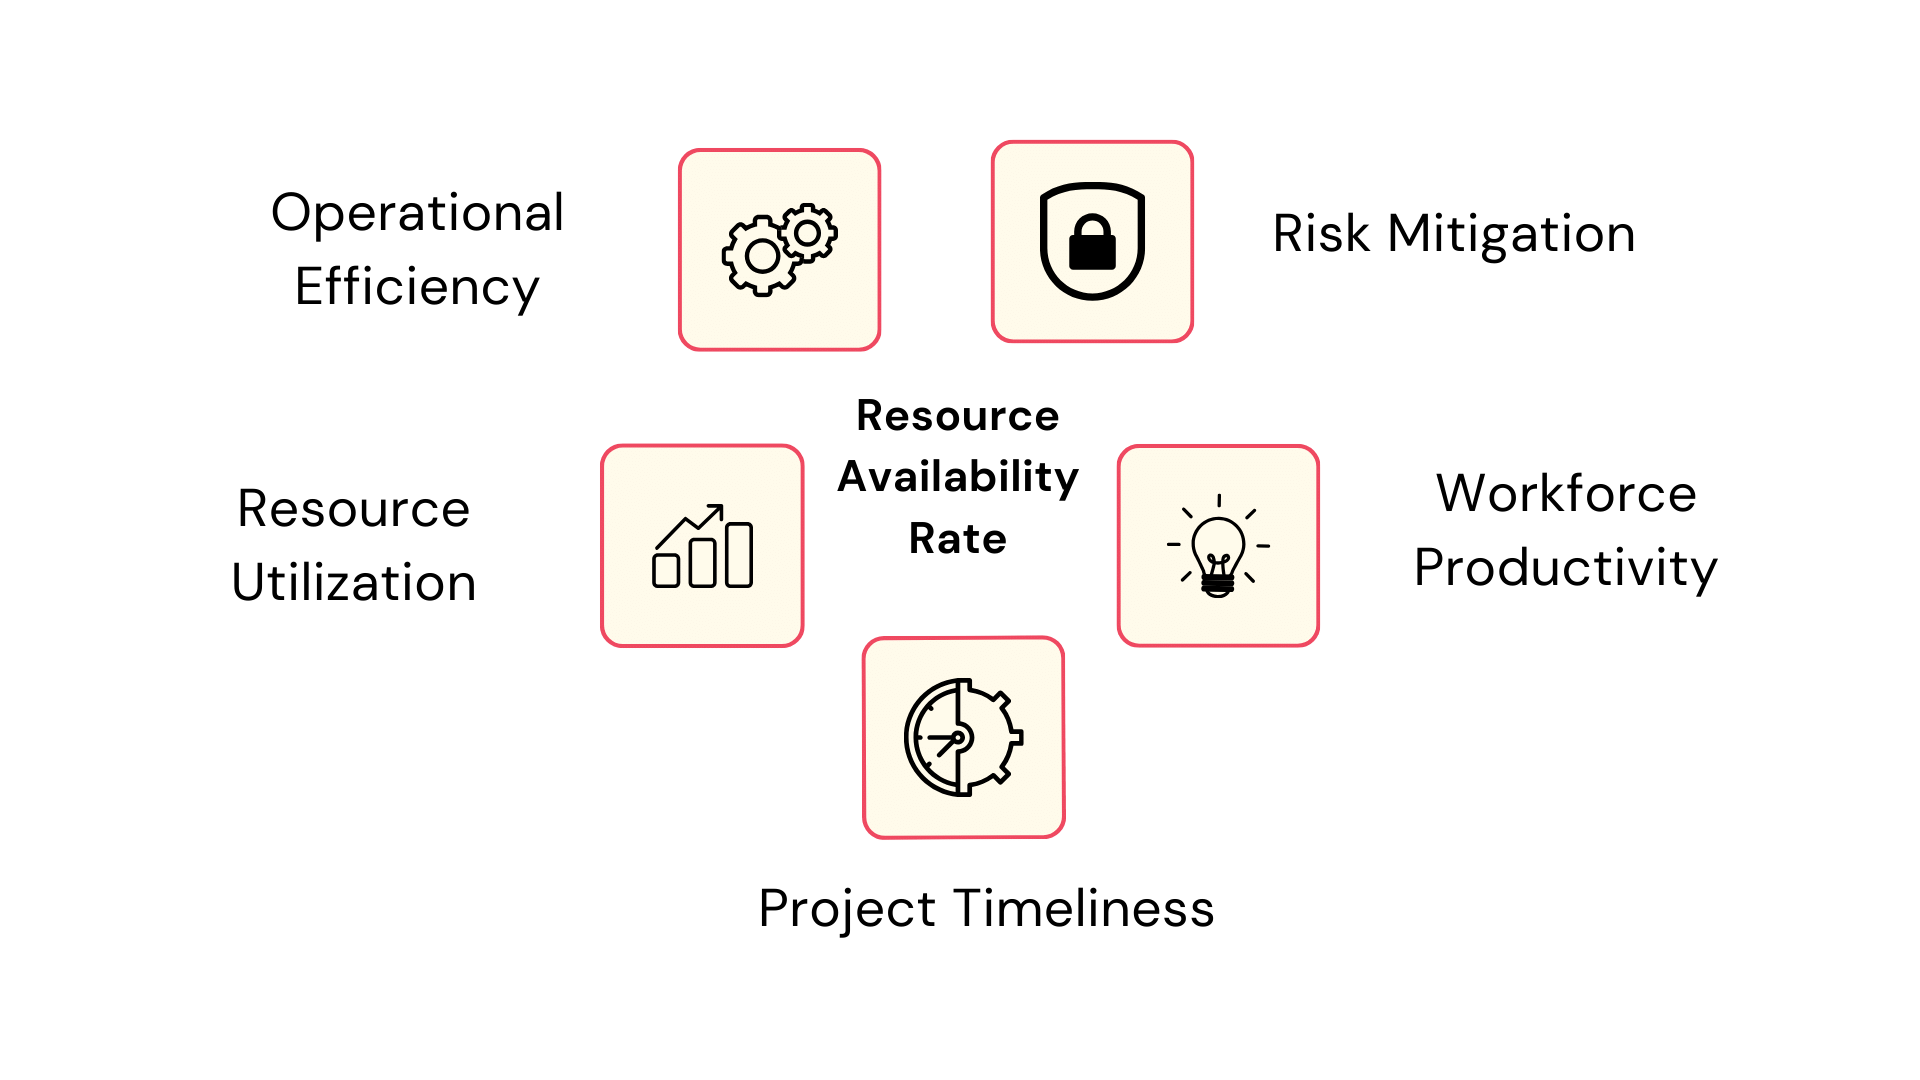 Resource availability rate